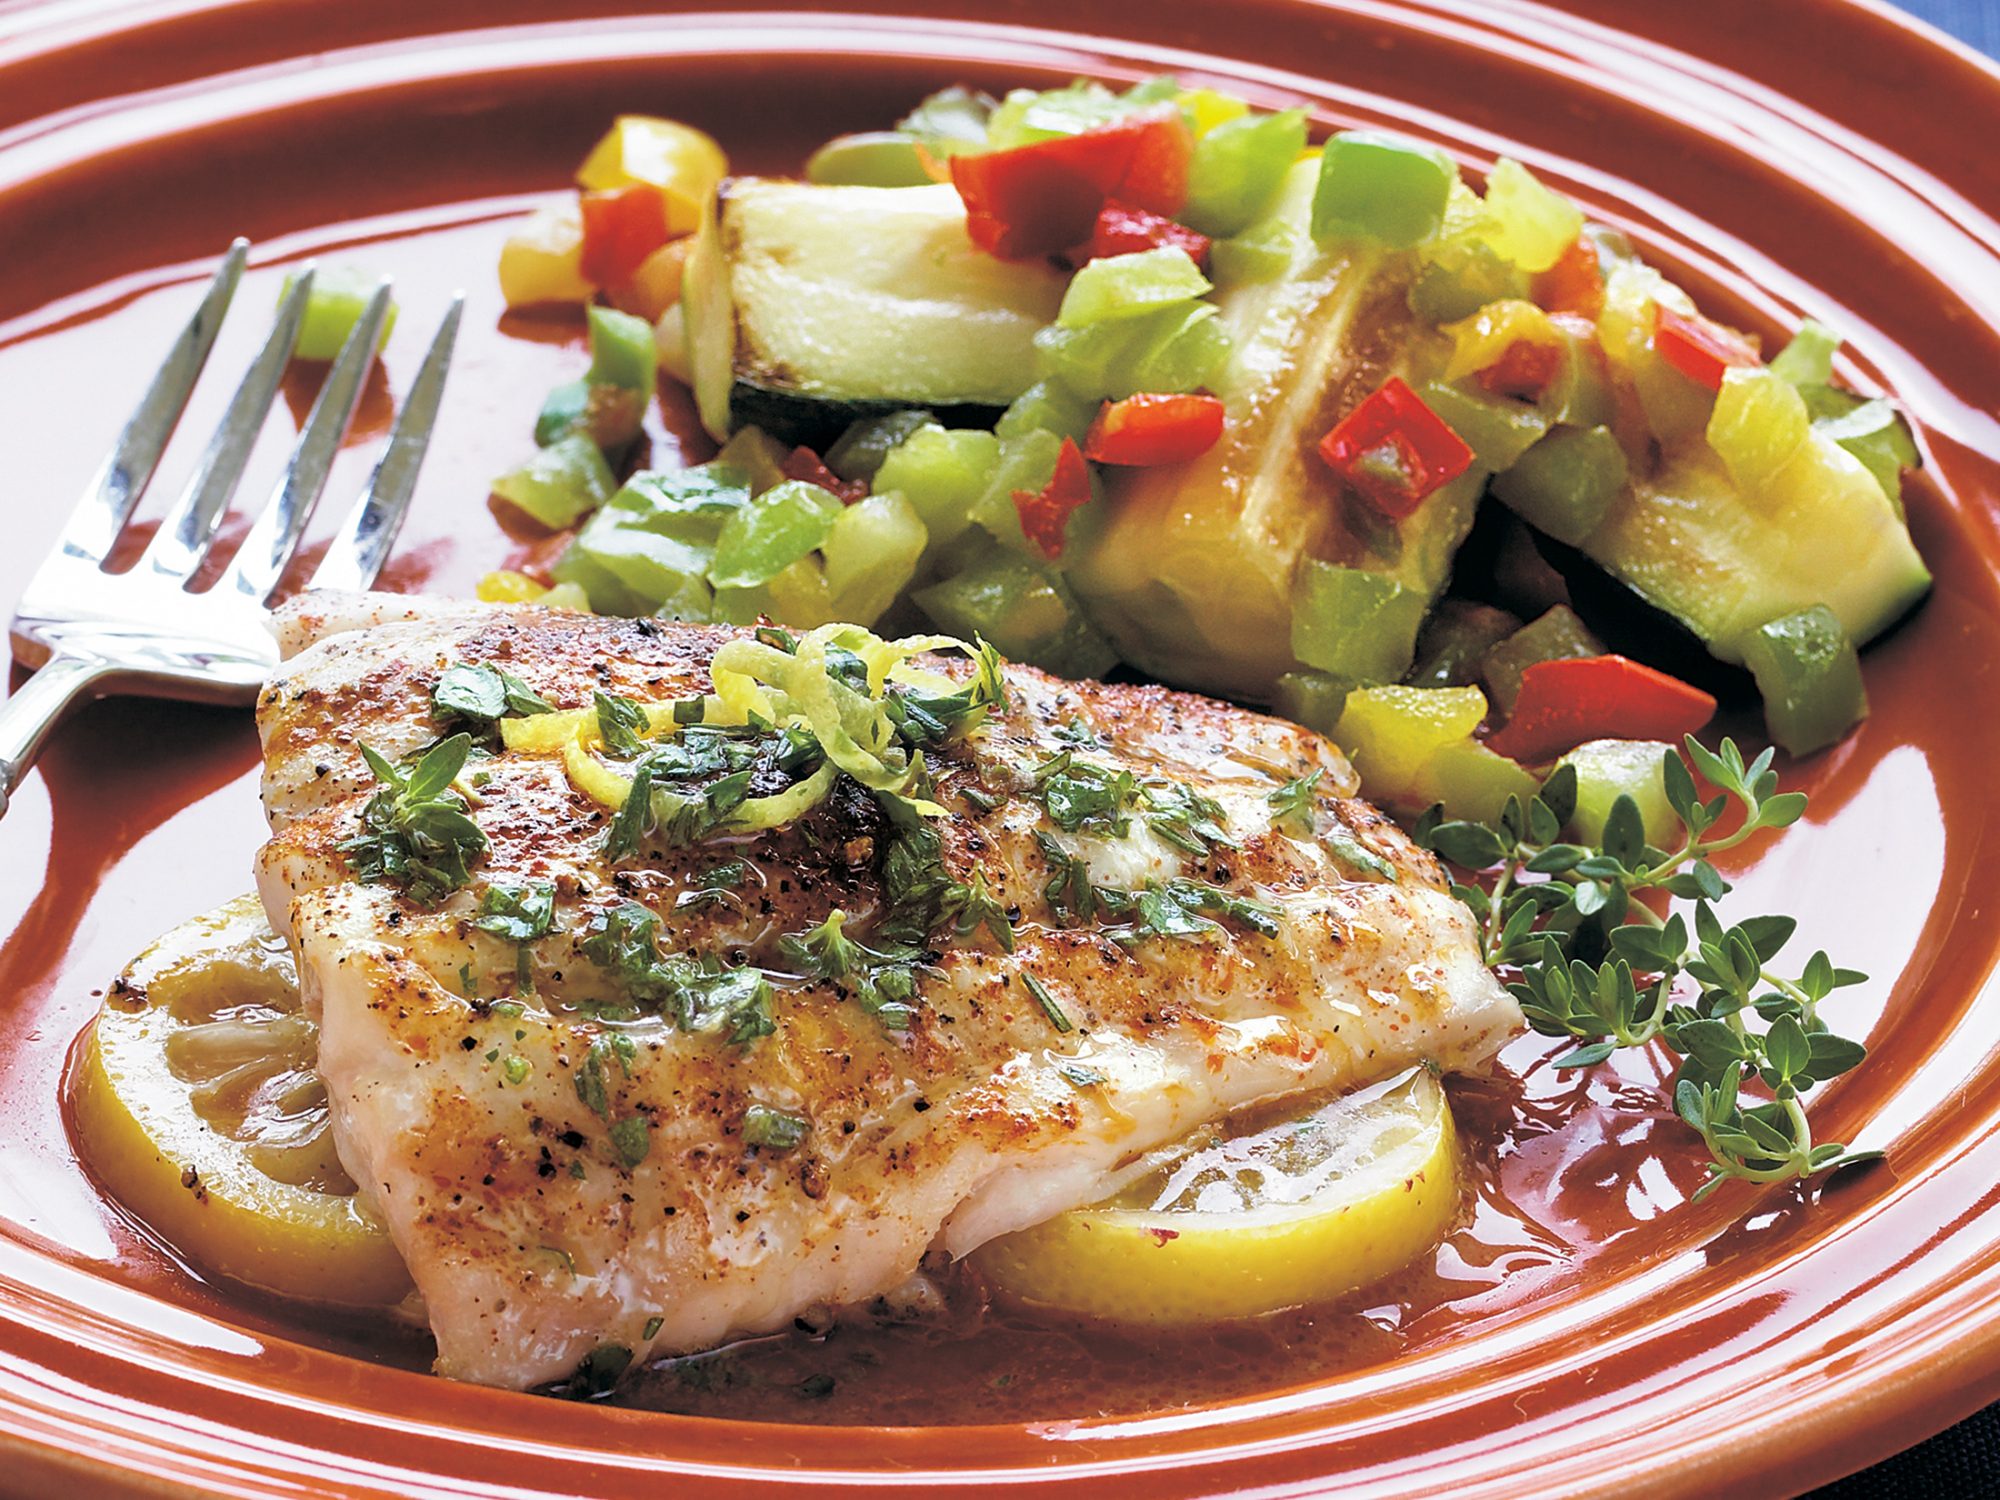 Baked Red Snapper With Garlic and Herbs Recipe